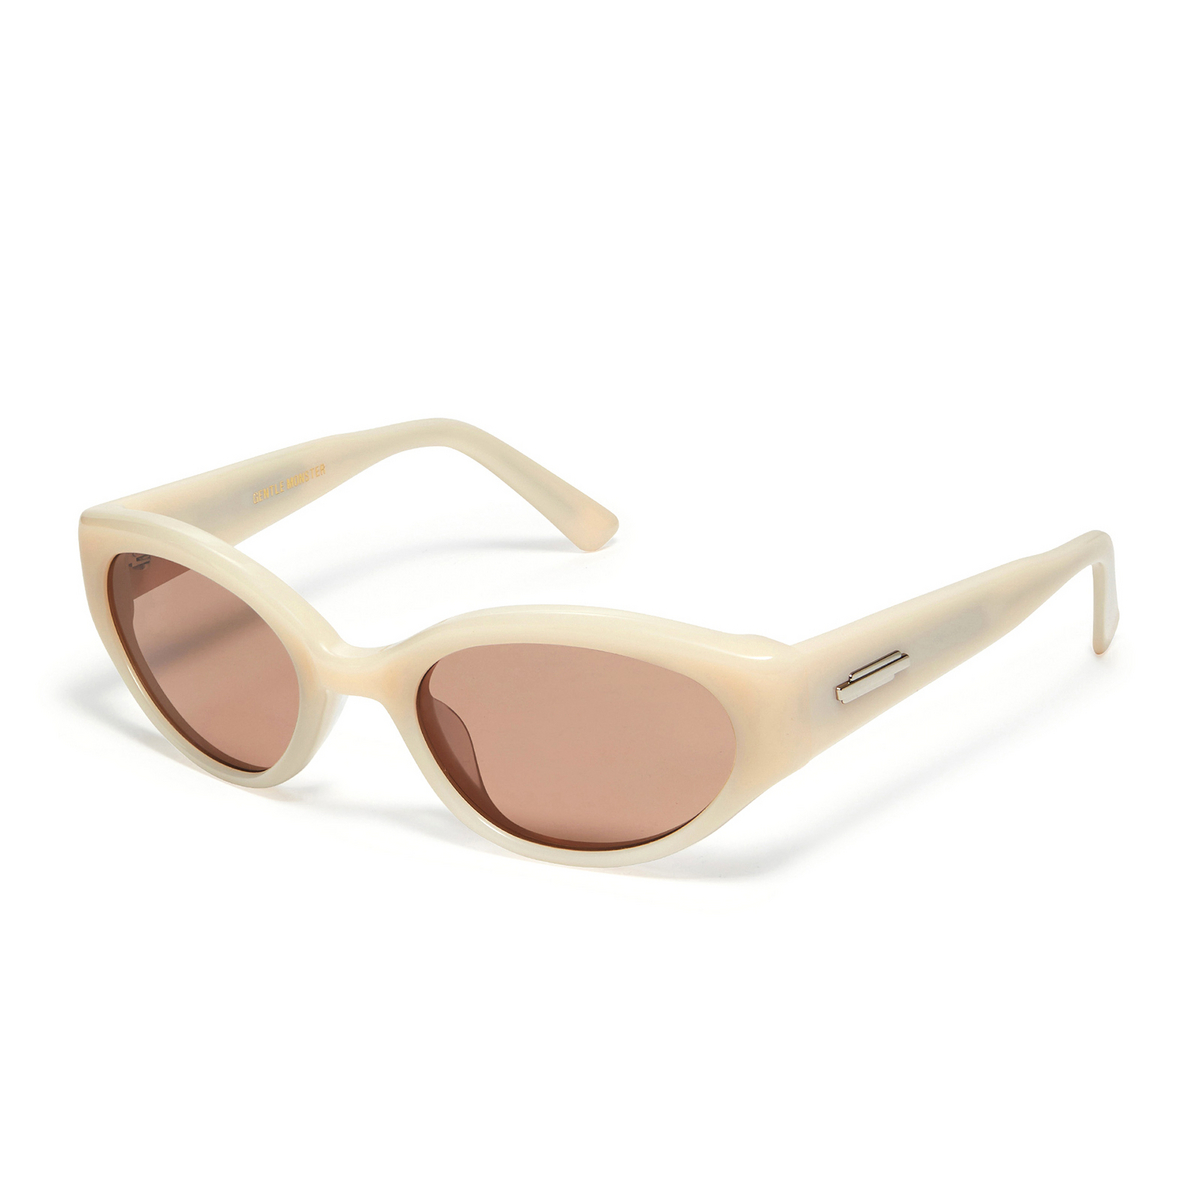 Gentle Monster® Cat-eye Sunglasses: Molto color Ivory IV1 - three-quarters view.